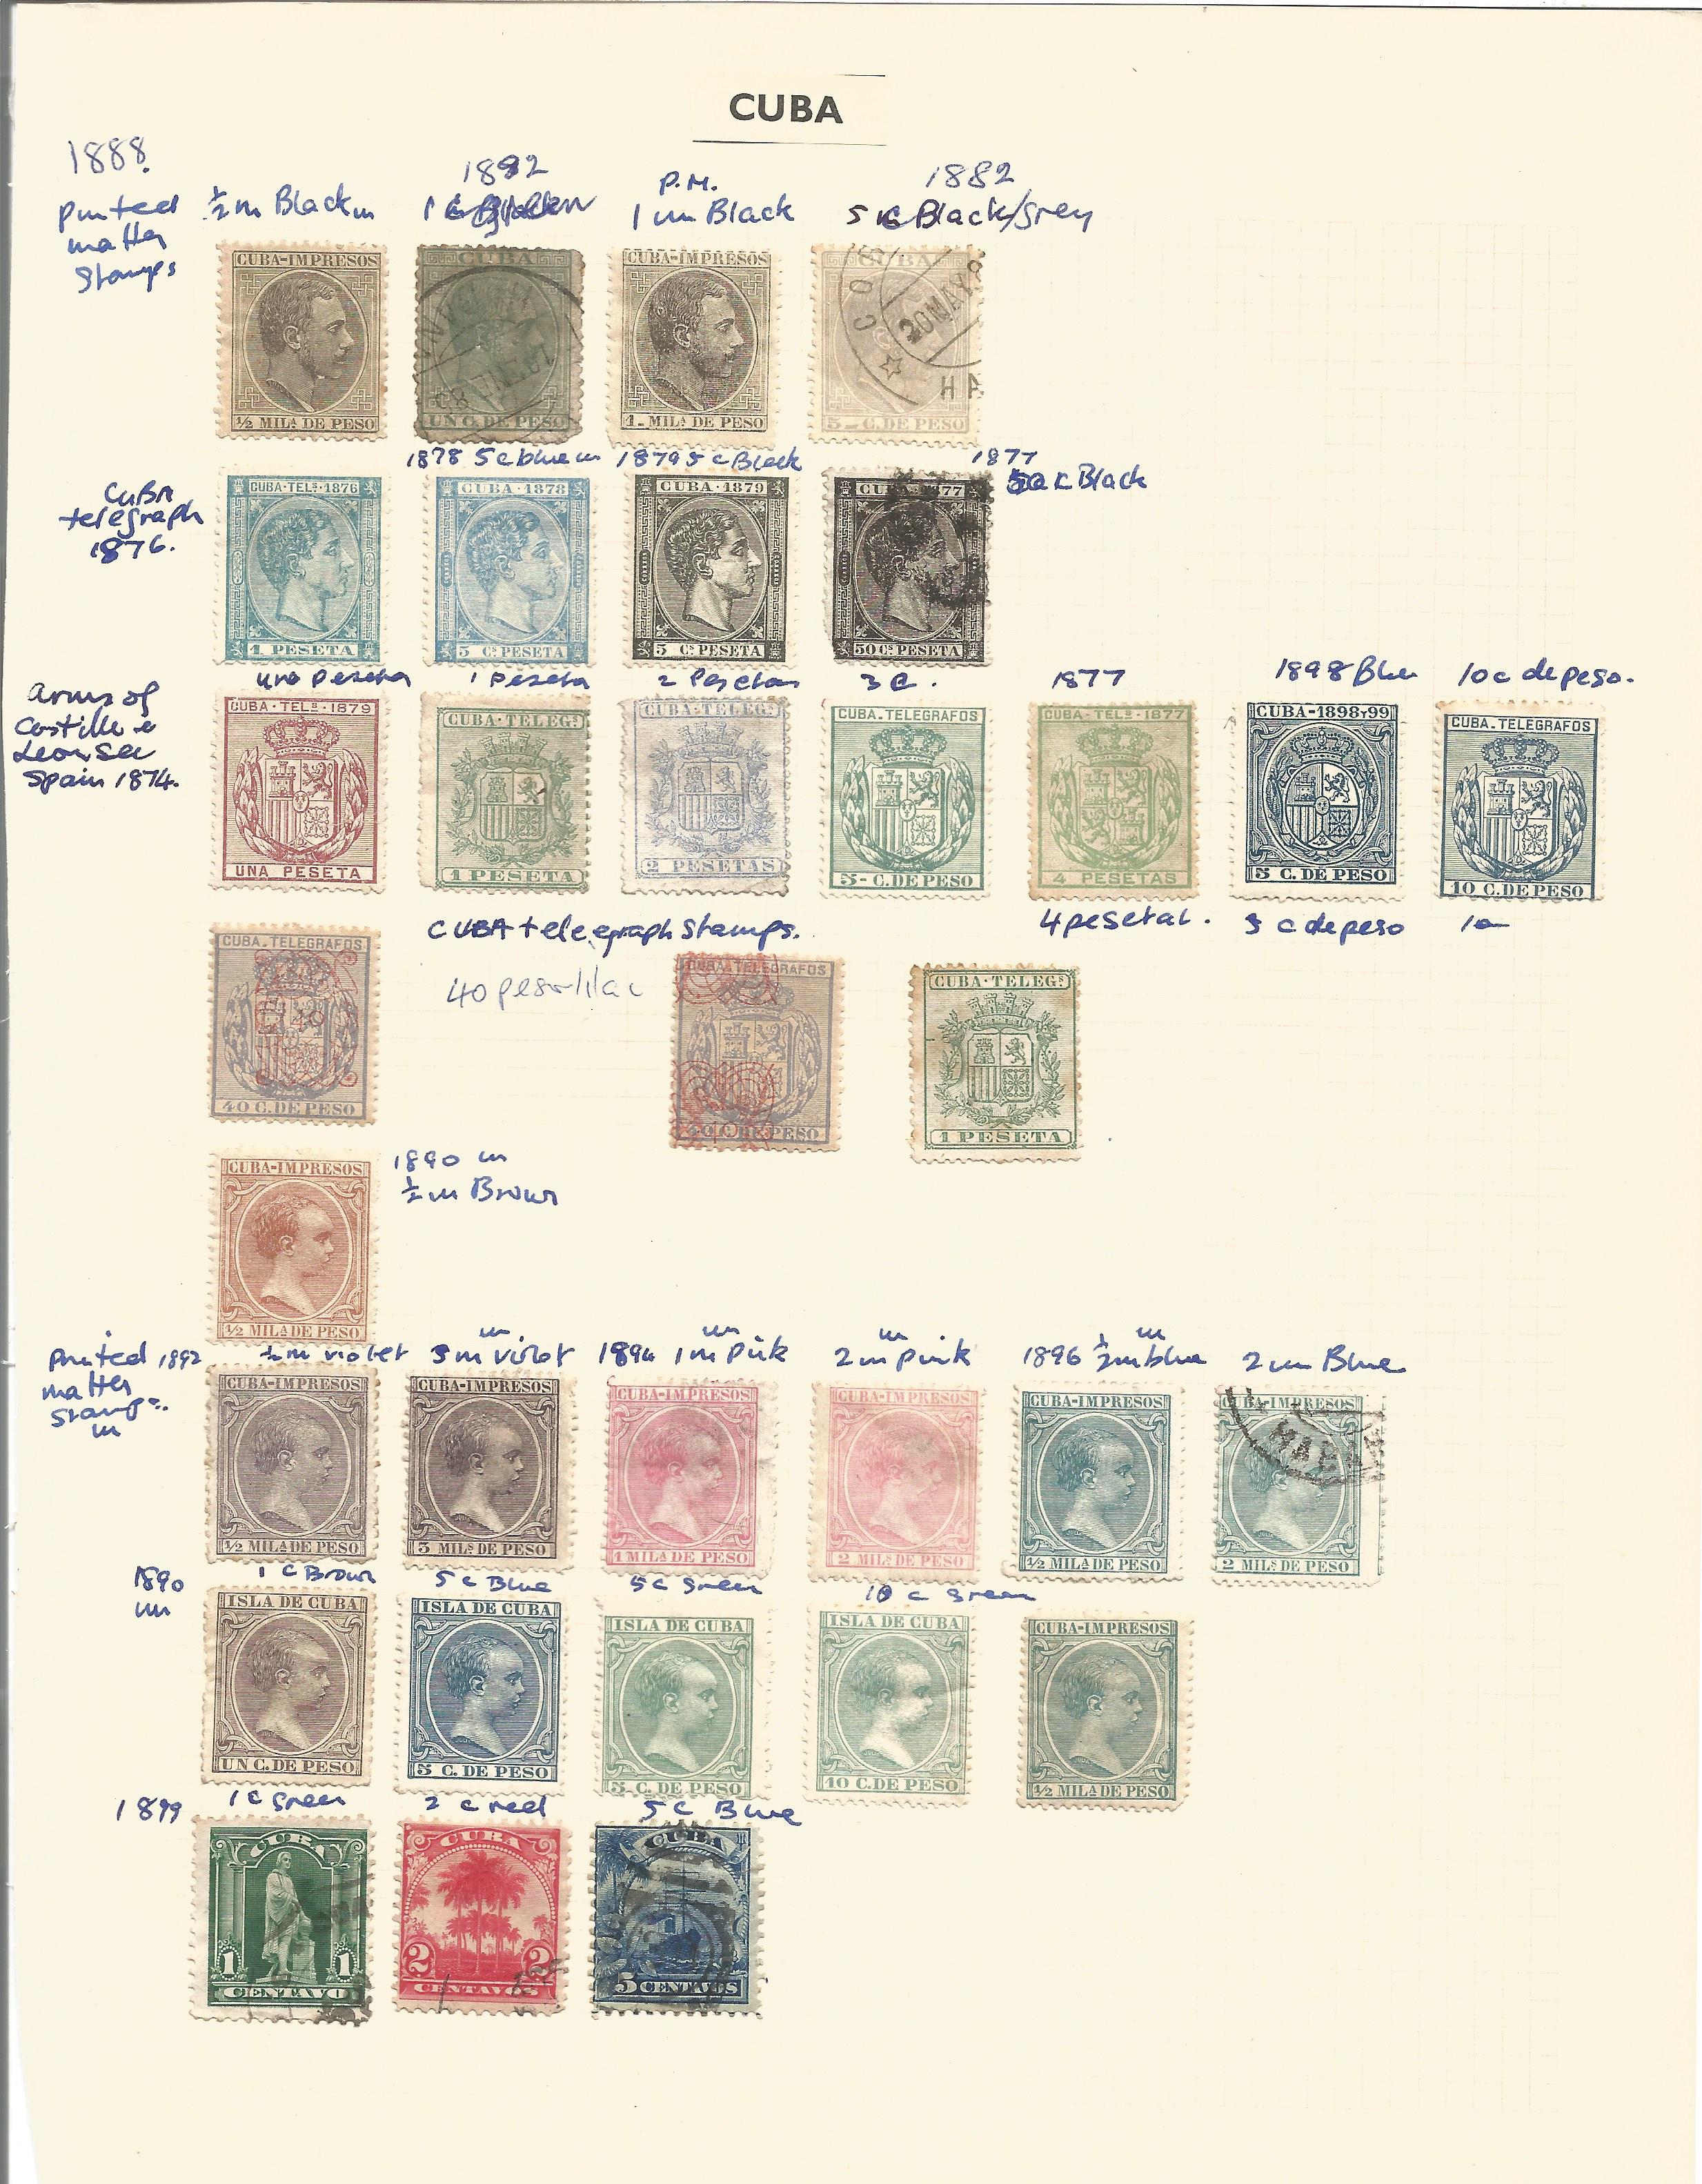 Cuba, Crete, Cyprus, Curacao, Netherlands, New Guinea, stamps on loose sheets, approx. 50. Good